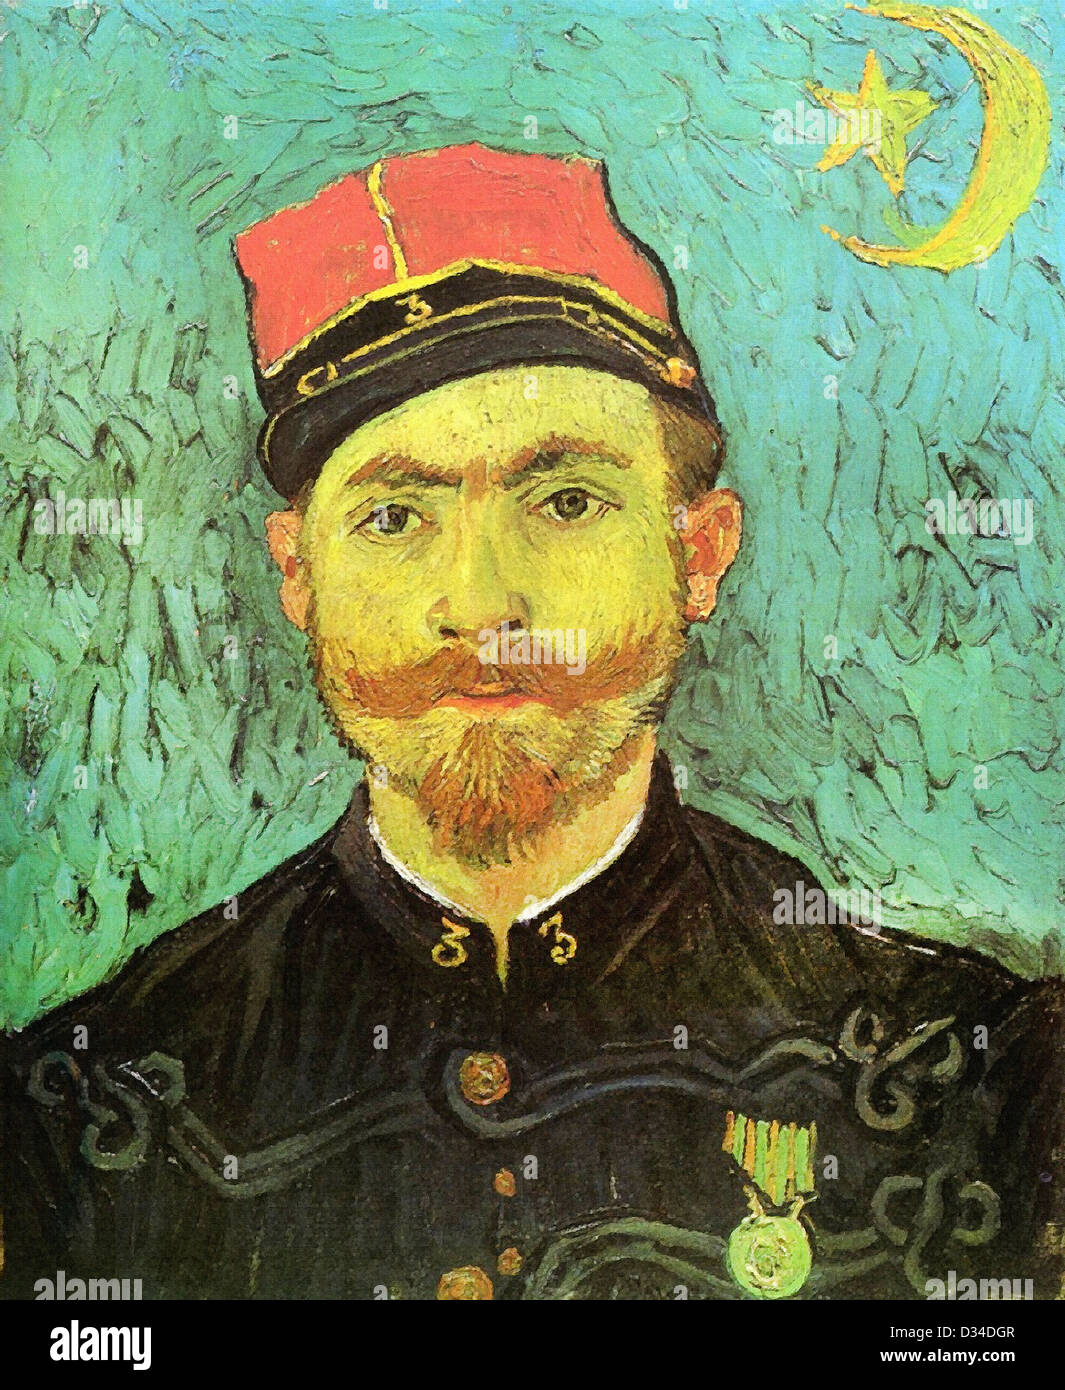 Vincent van Gogh, Portrait of Milliet, Second Lieutnant of the Zouaves. 1888. Oil on canvas. Post-Impressionism. Stock Photo